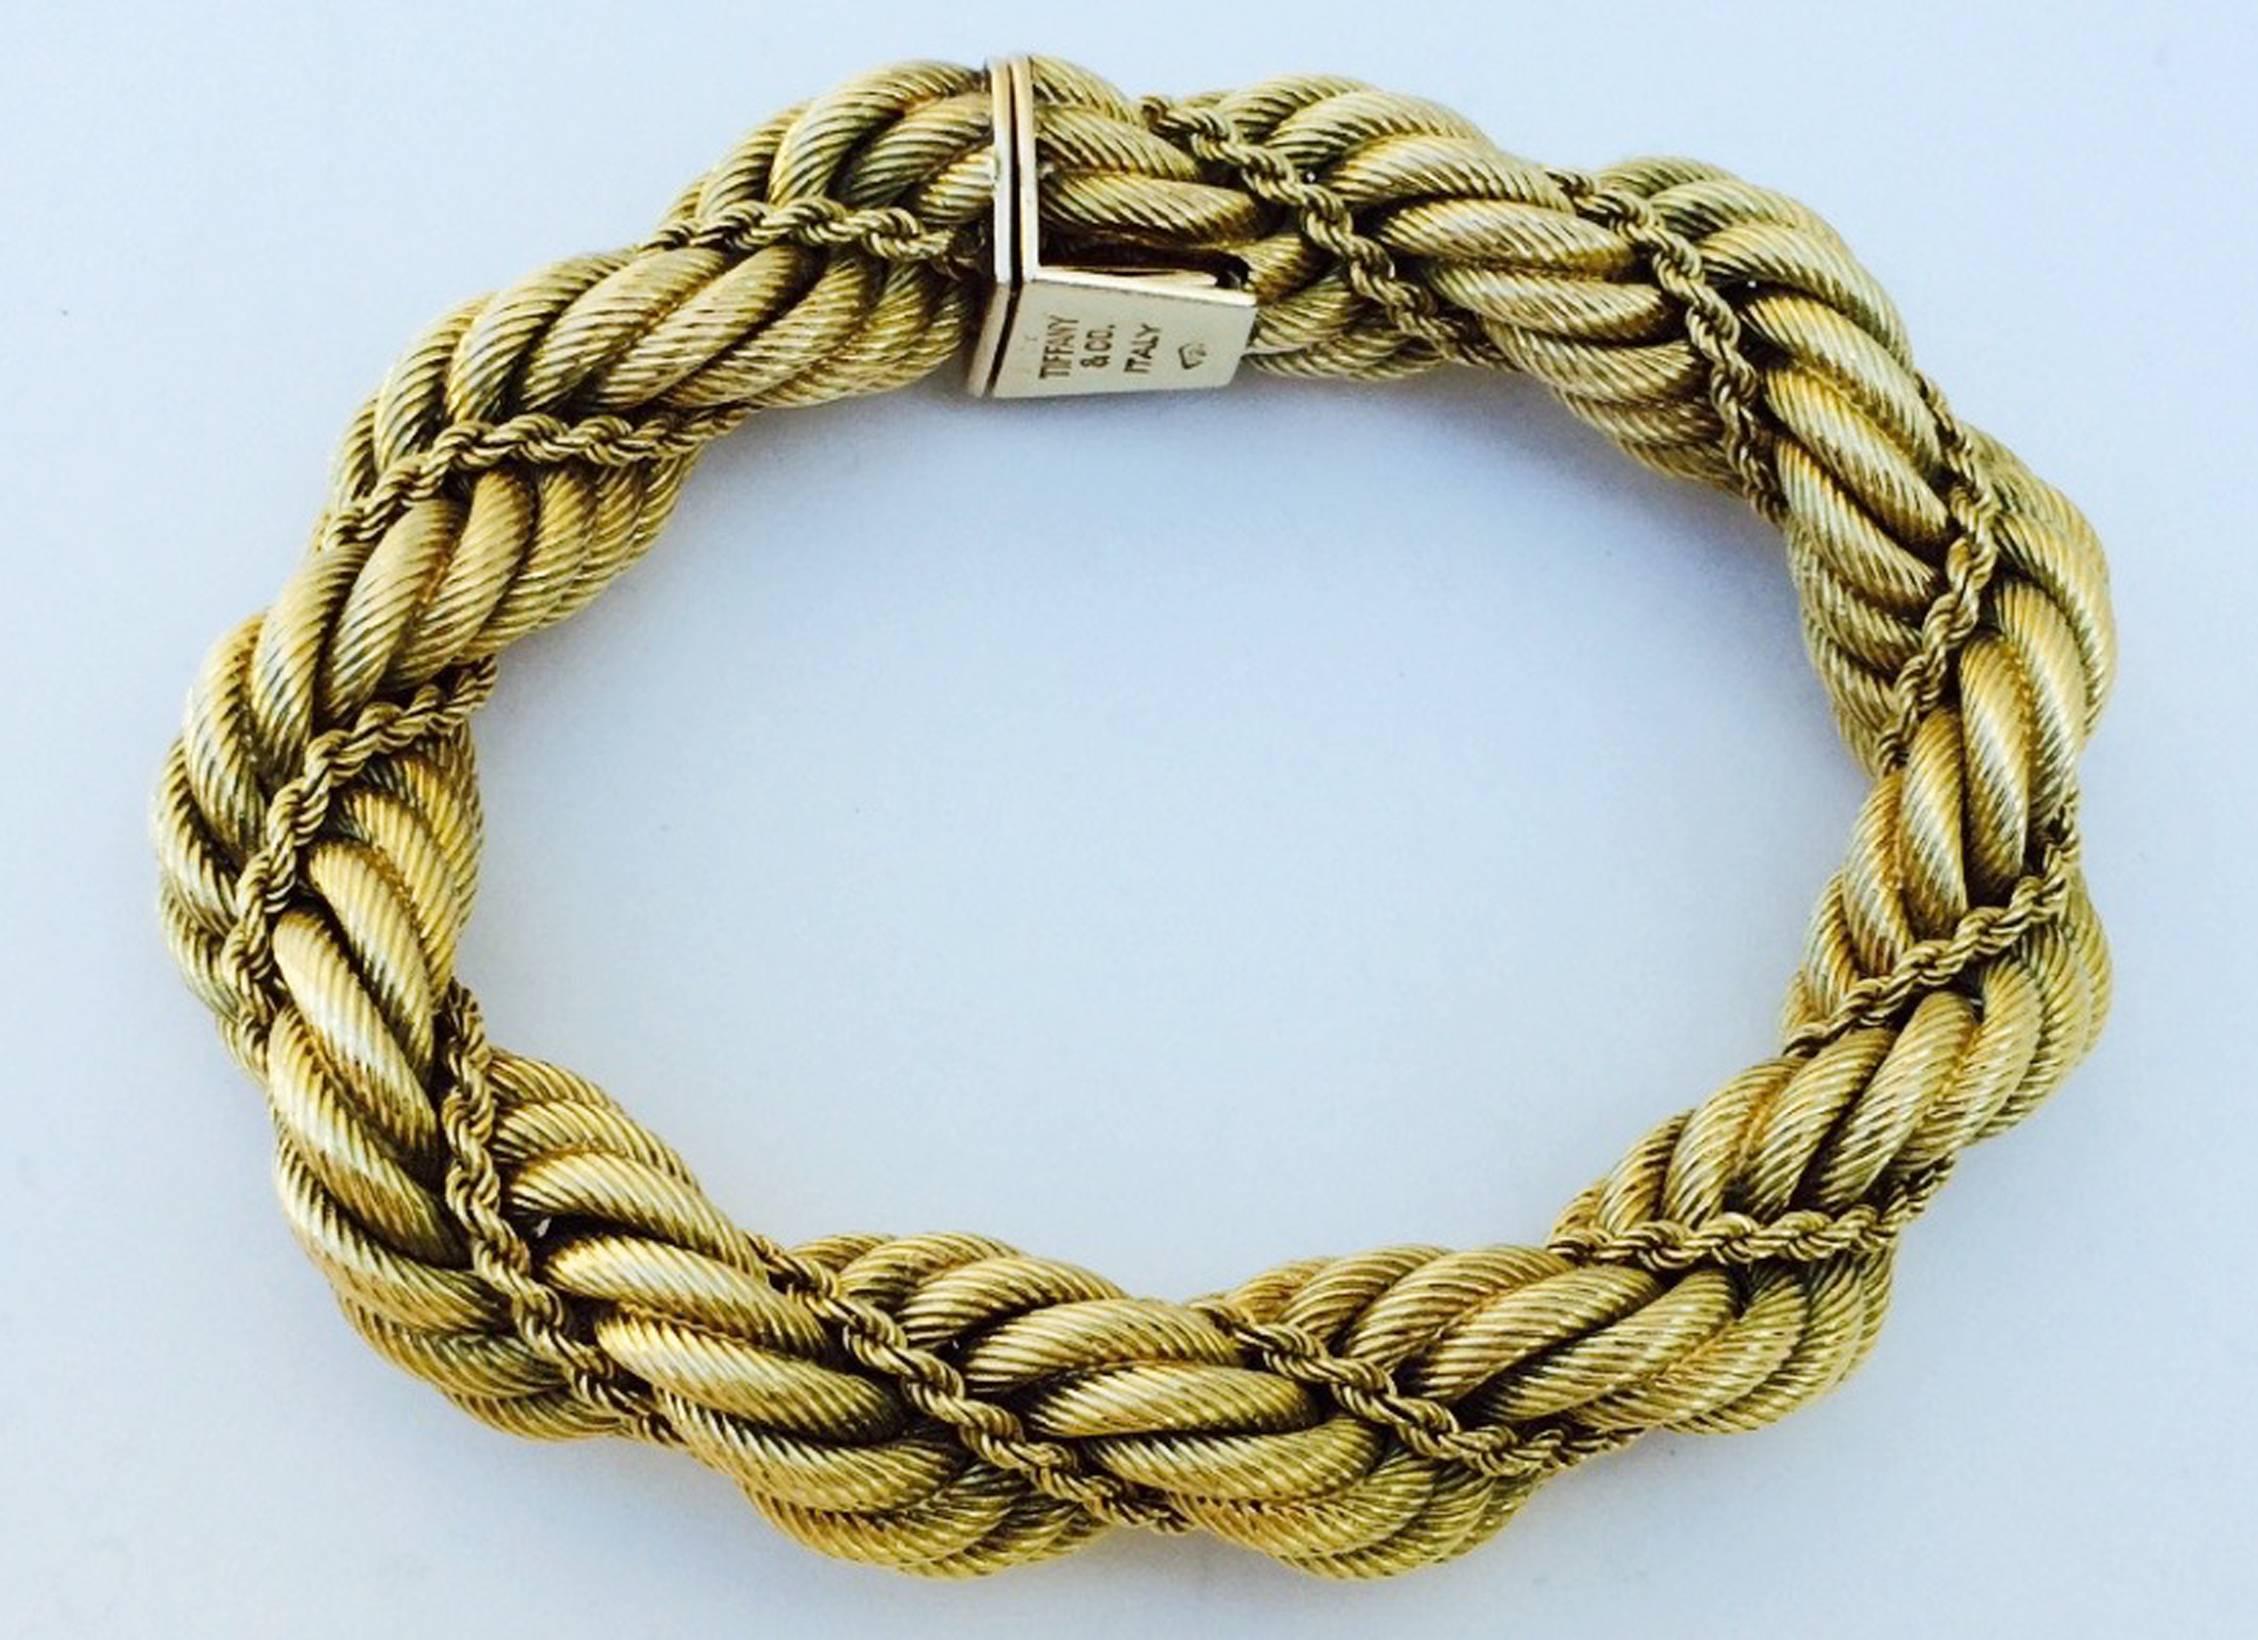 A fine Tiffany & Co. heavy gold rope bracelet. Signed yellow gold item twisted with two chain styles. Item secures with a hidden push clasp closure and hinged lock. Excellent with no issues.